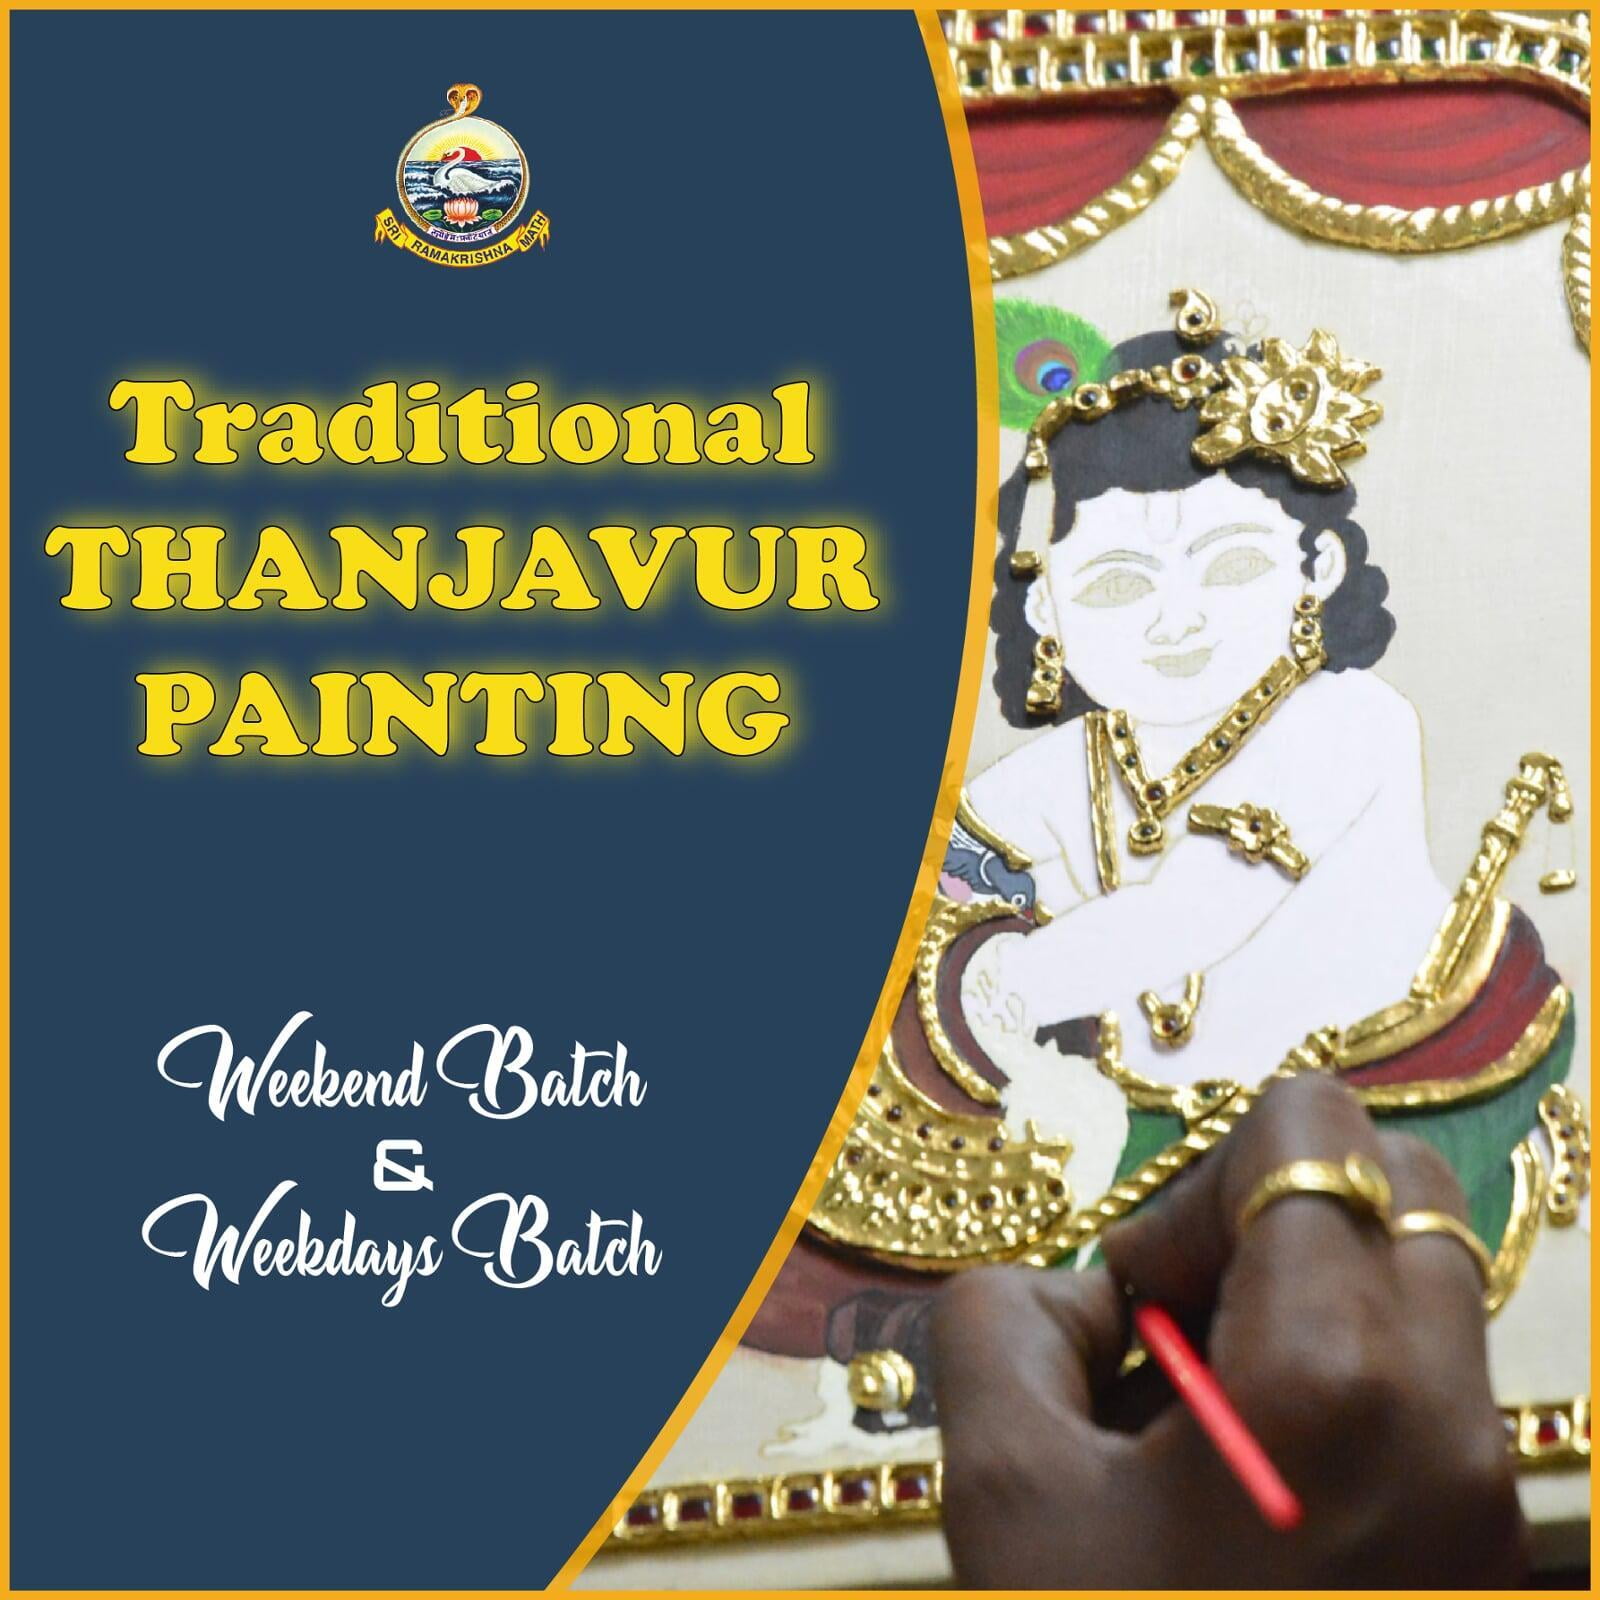 Valedictory Function of the 26th (Weekend)  & 27th (Weekdays) Batches of Thanjavur Painting Course 